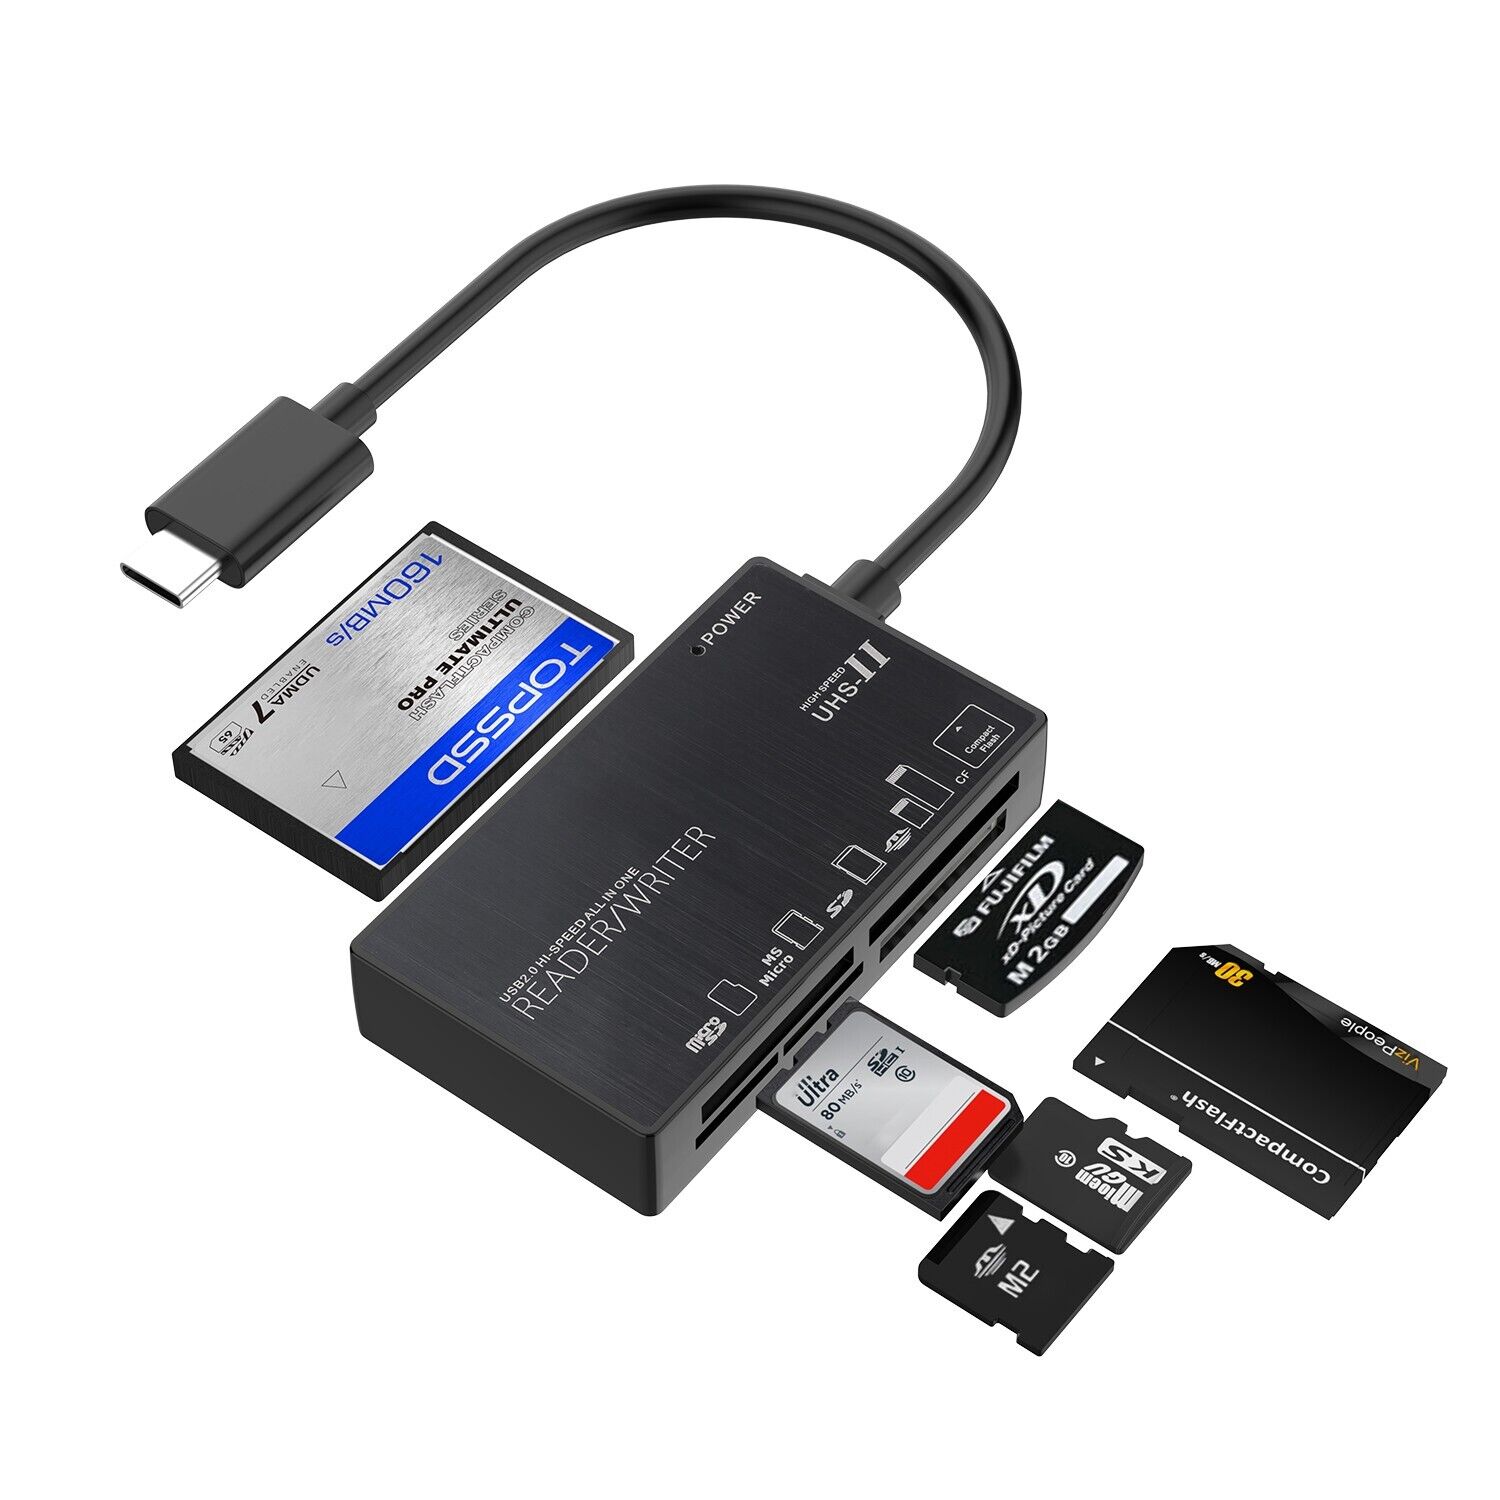 6-in-1 USB Hub 2.0 Type-C Multi Card Reader OTG Adapter For Android Smartphone